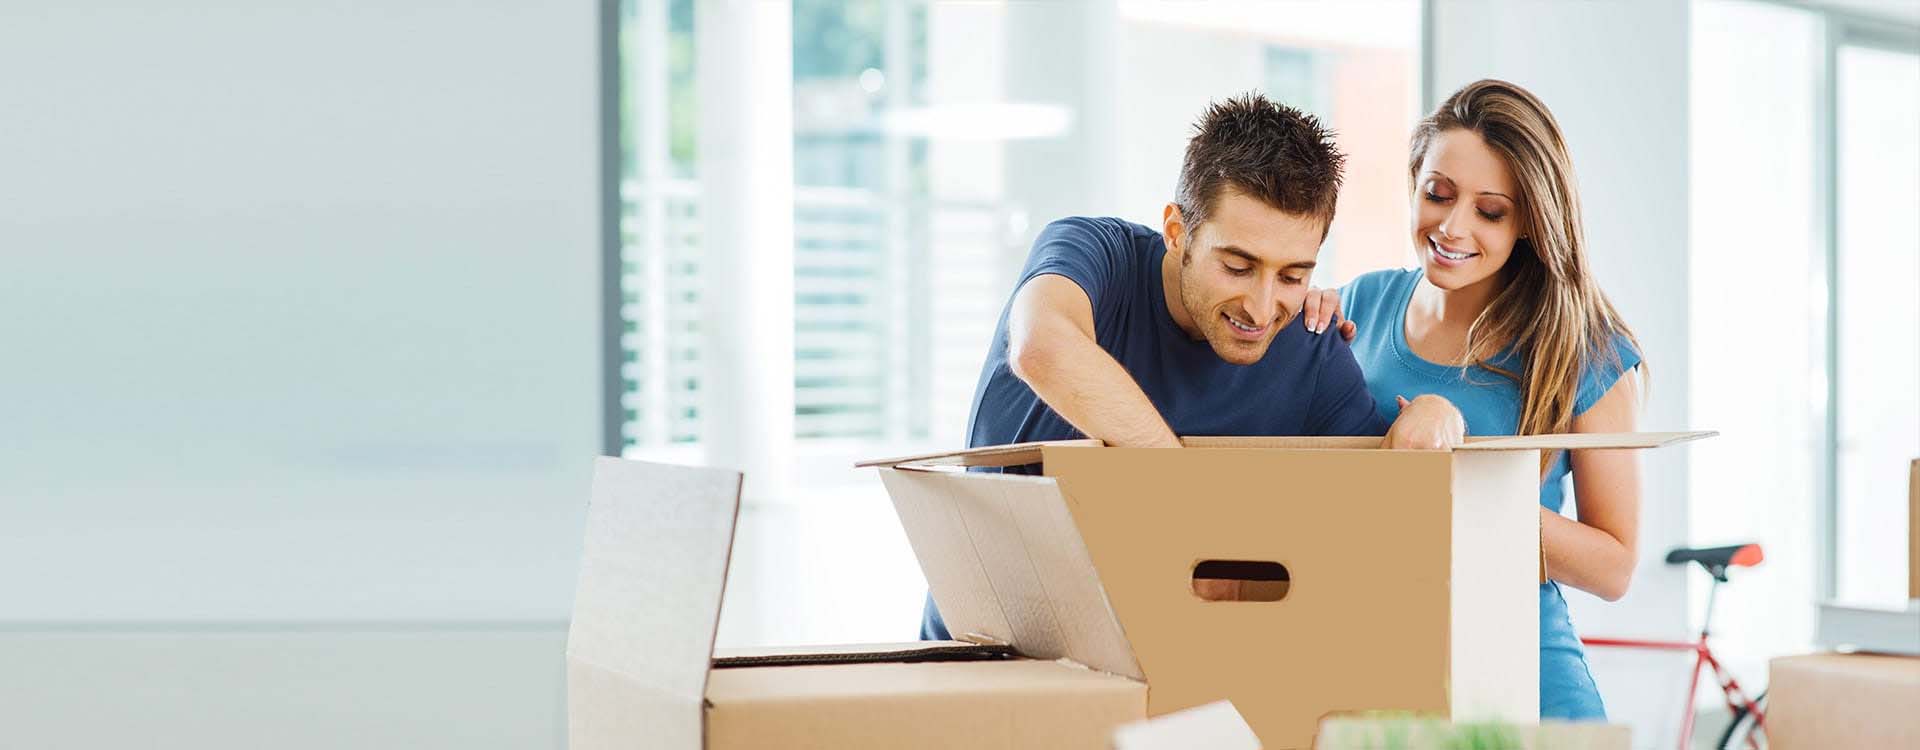 Best Packers and Movers Services in Pune